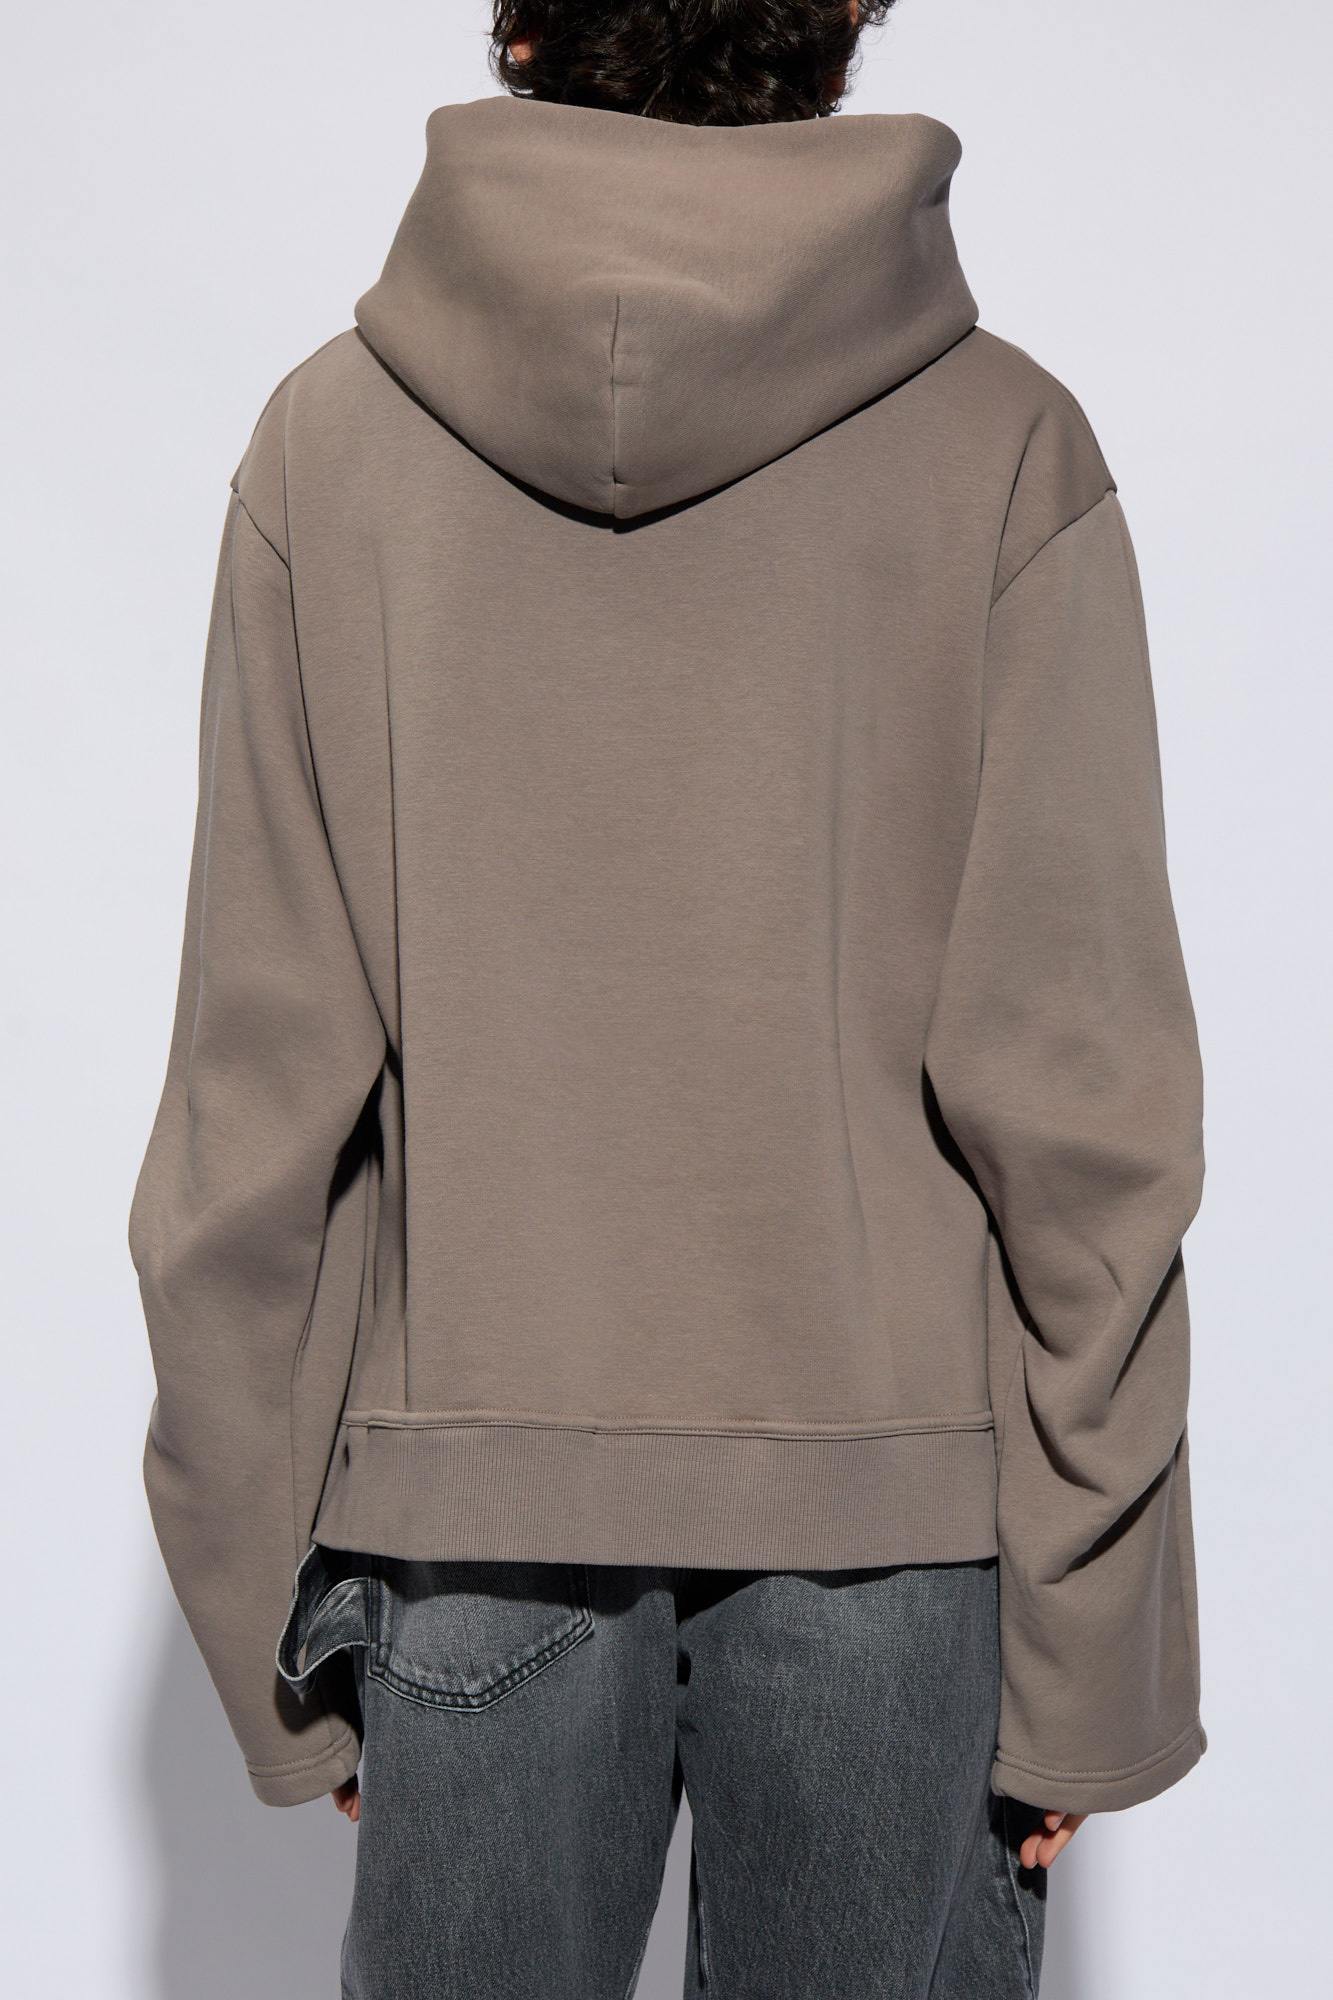 MM6 Maison Margiela protect hoodie with pocket